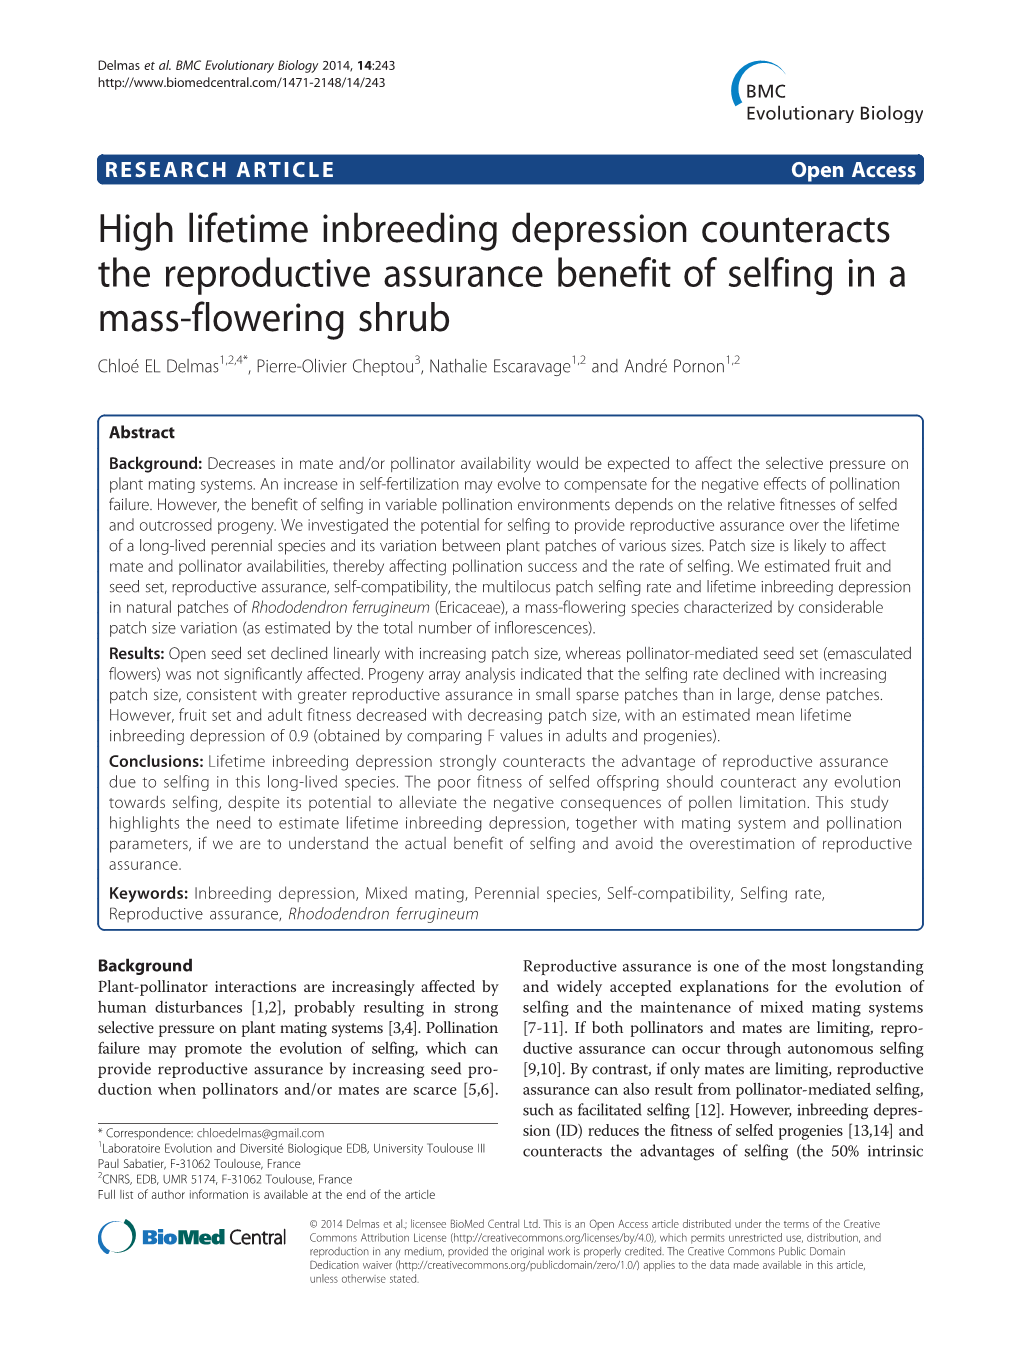 High Lifetime Inbreeding Depression Counteracts the Reproductive